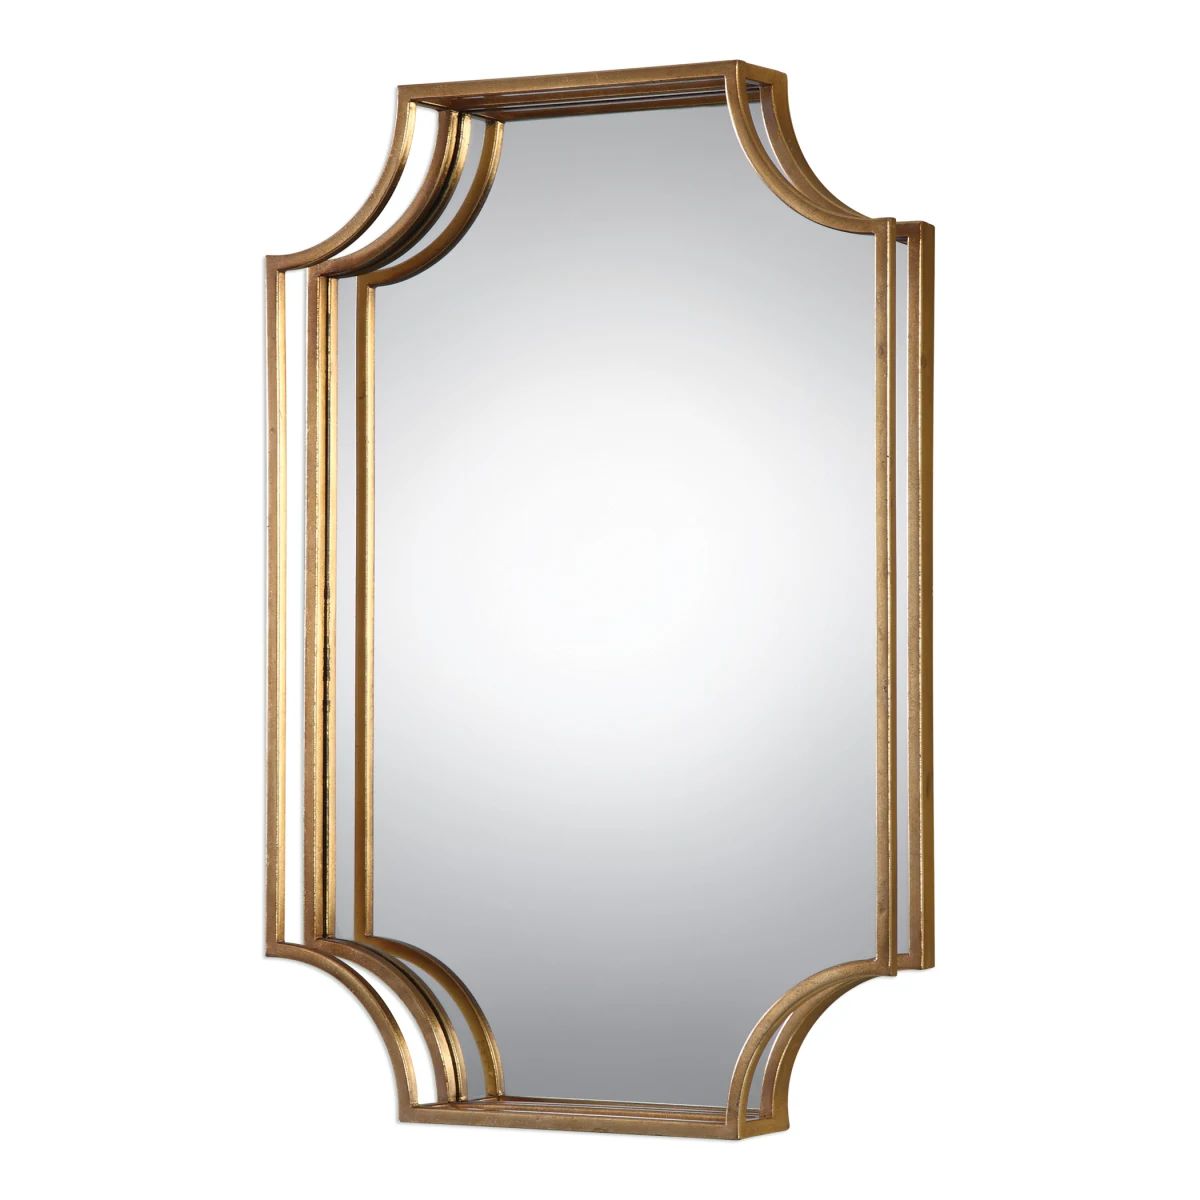 Lindee 20"W Contemporary 3-D Open Framed Vanity Style Wall Mirror | Build.com, Inc.